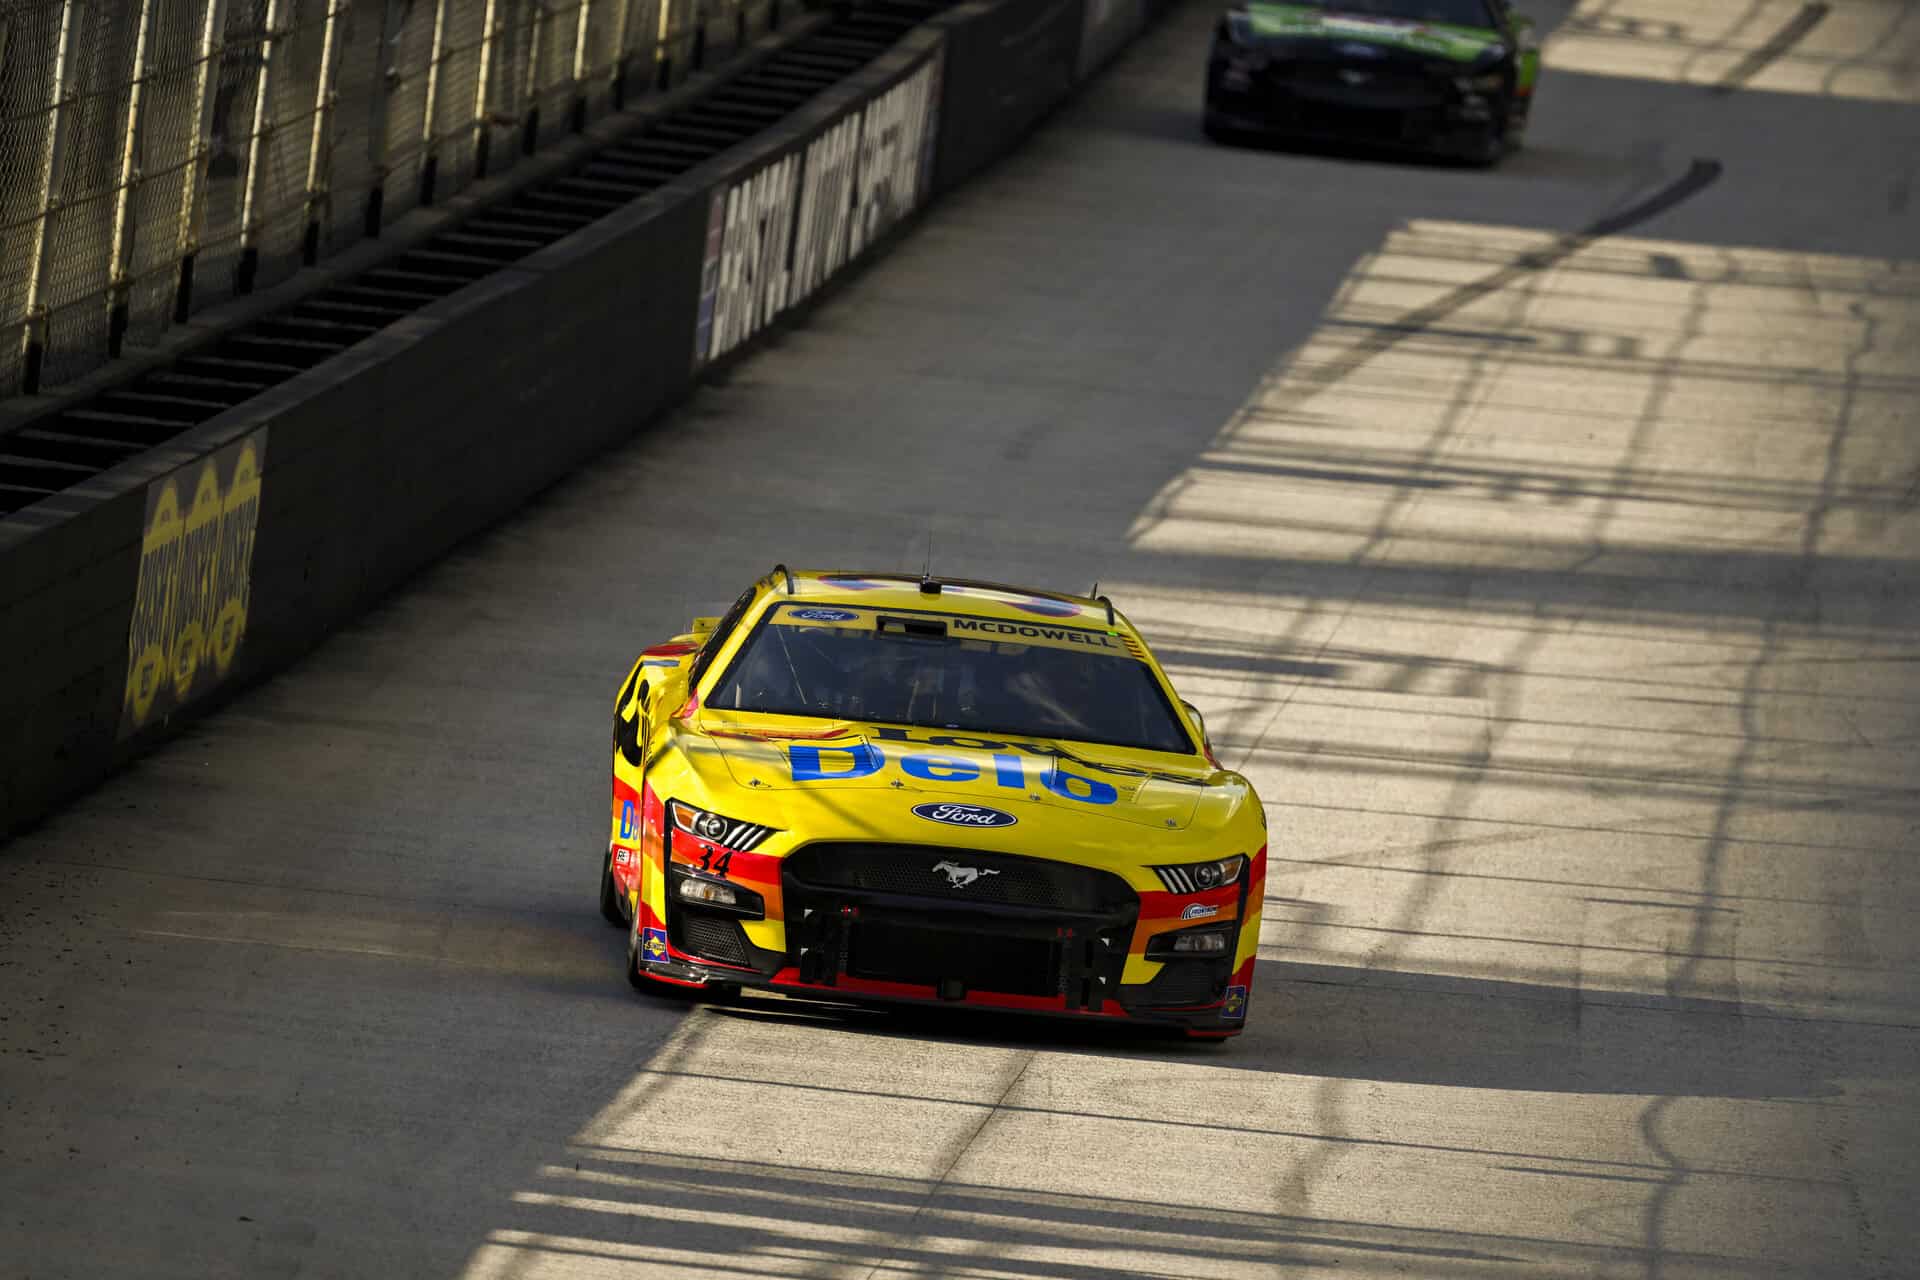 Michael McDowell shines with strong performance at Bristol Motor Speedway